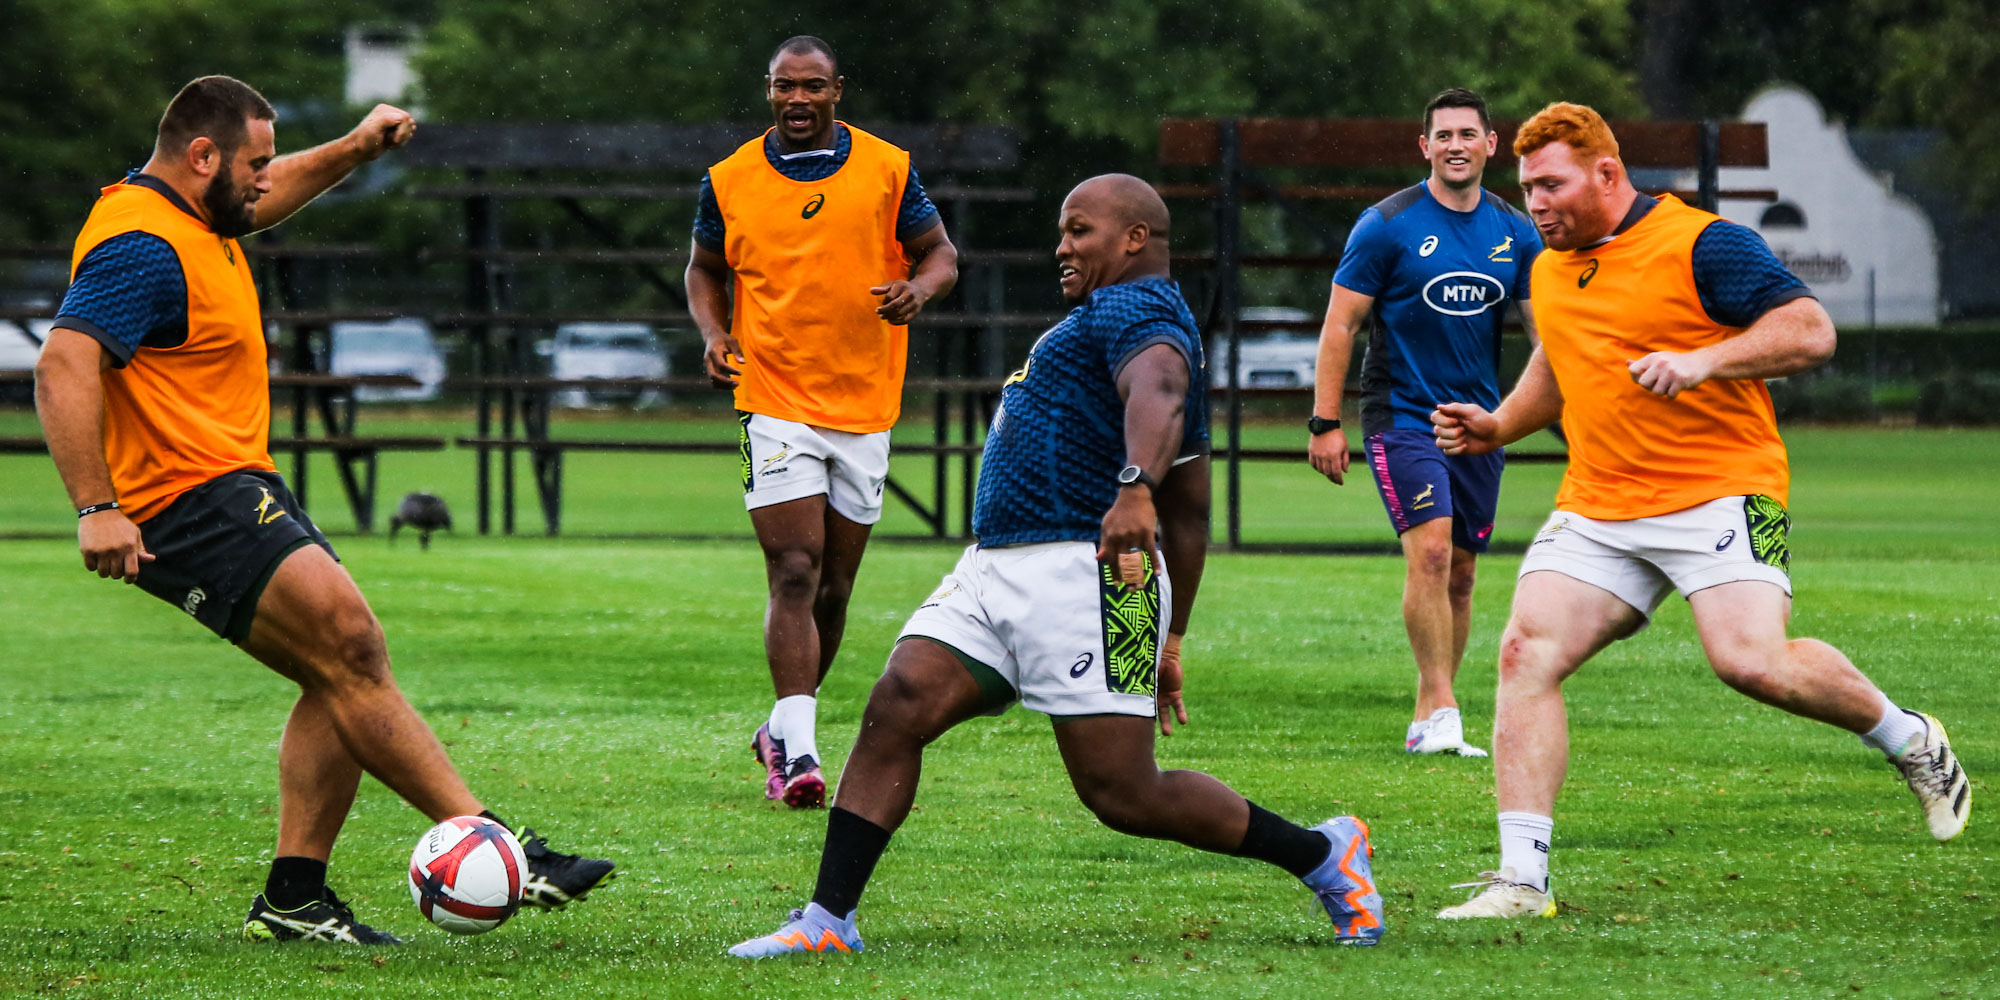 Not your typical rugby warm-up drill.